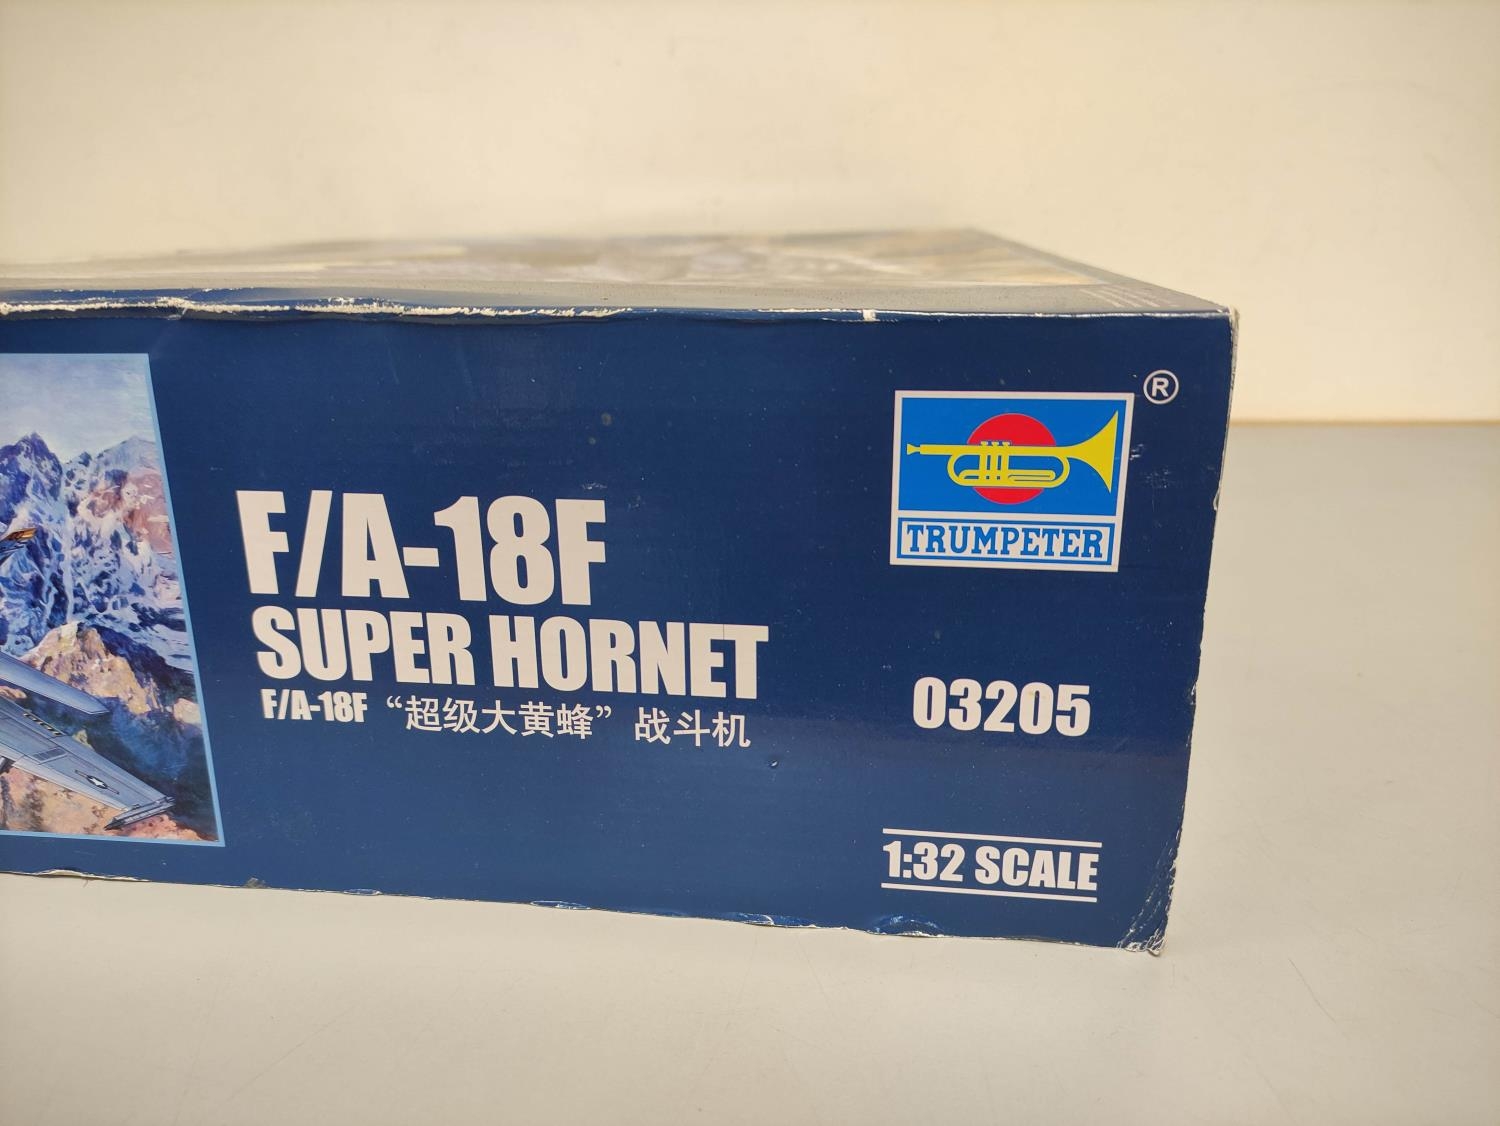 Trumpeter. Boxed 1:32 scale model aviation kit F/A-18F Super Hornet 03205. - Image 5 of 5